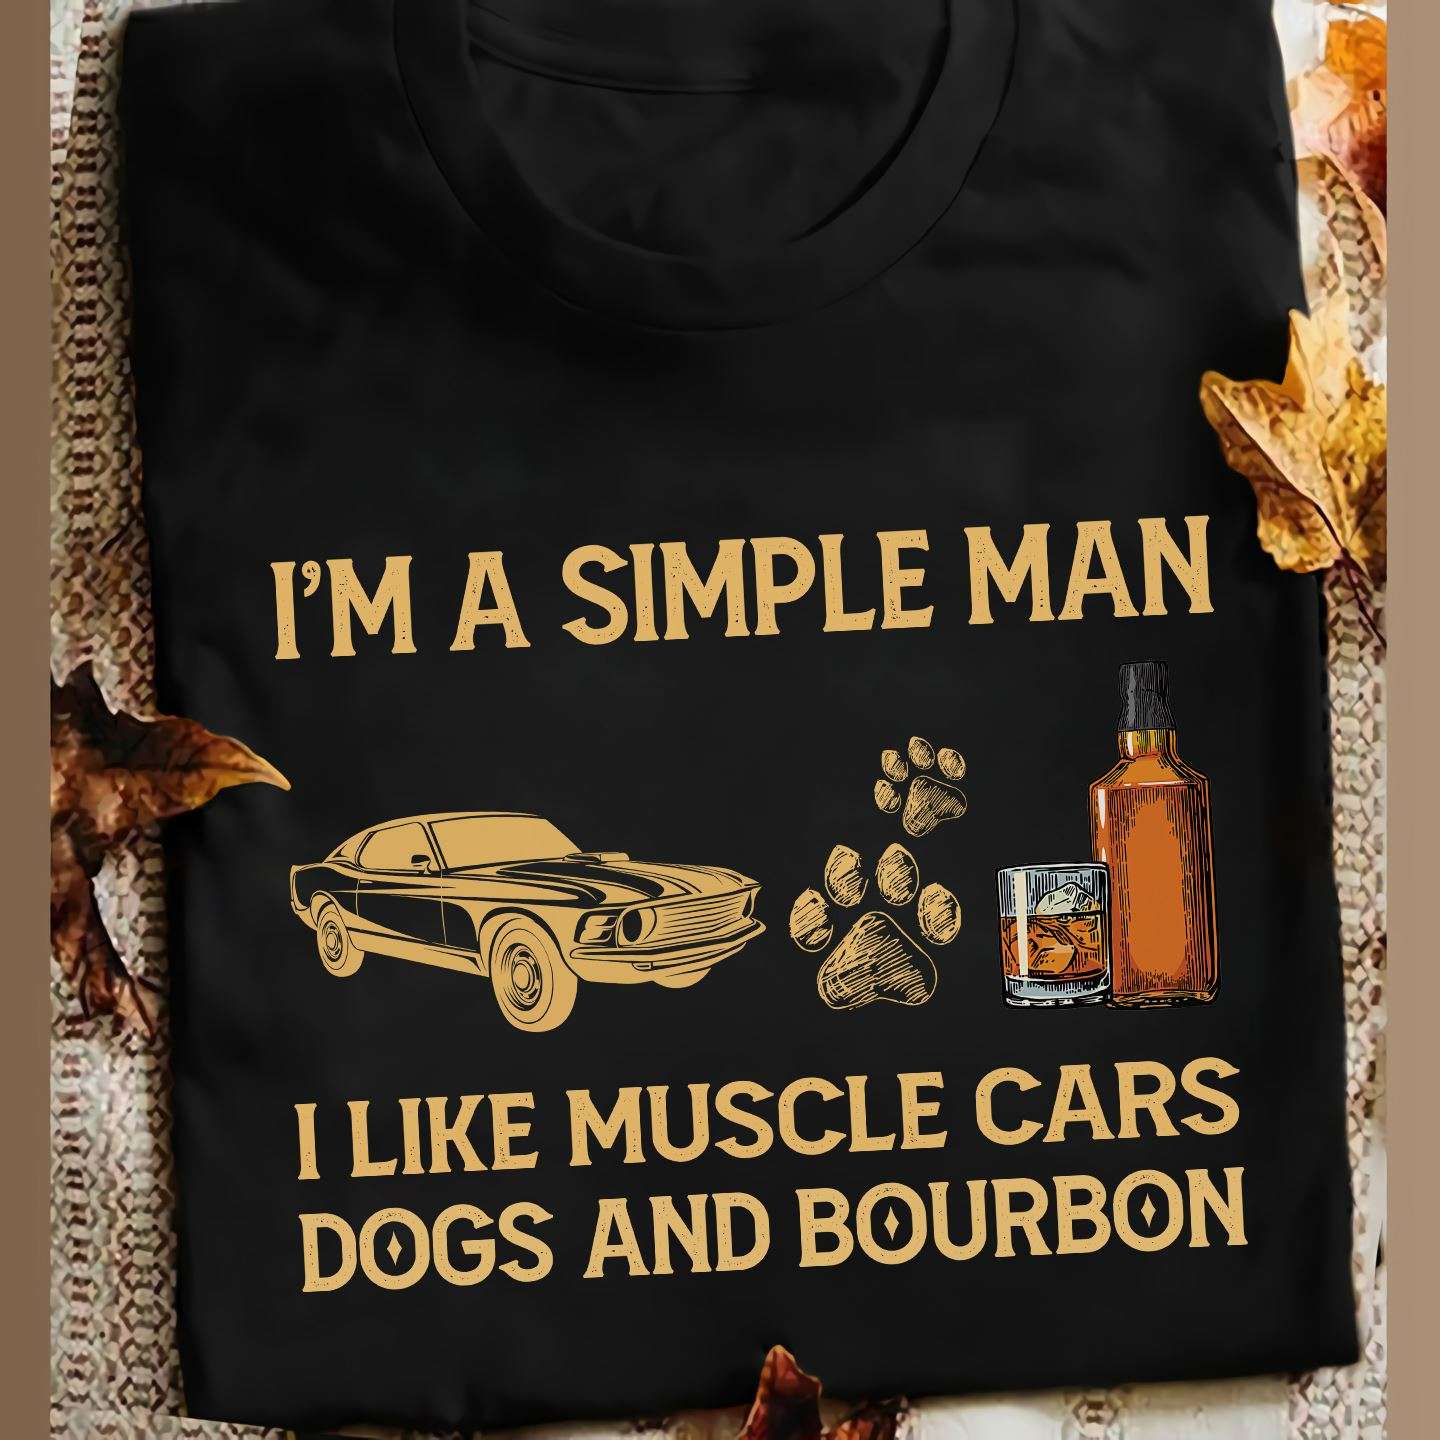 Muscle Cars Dogs And Bourbon - I'm a simple man i like muscle cars dogs and bourbon